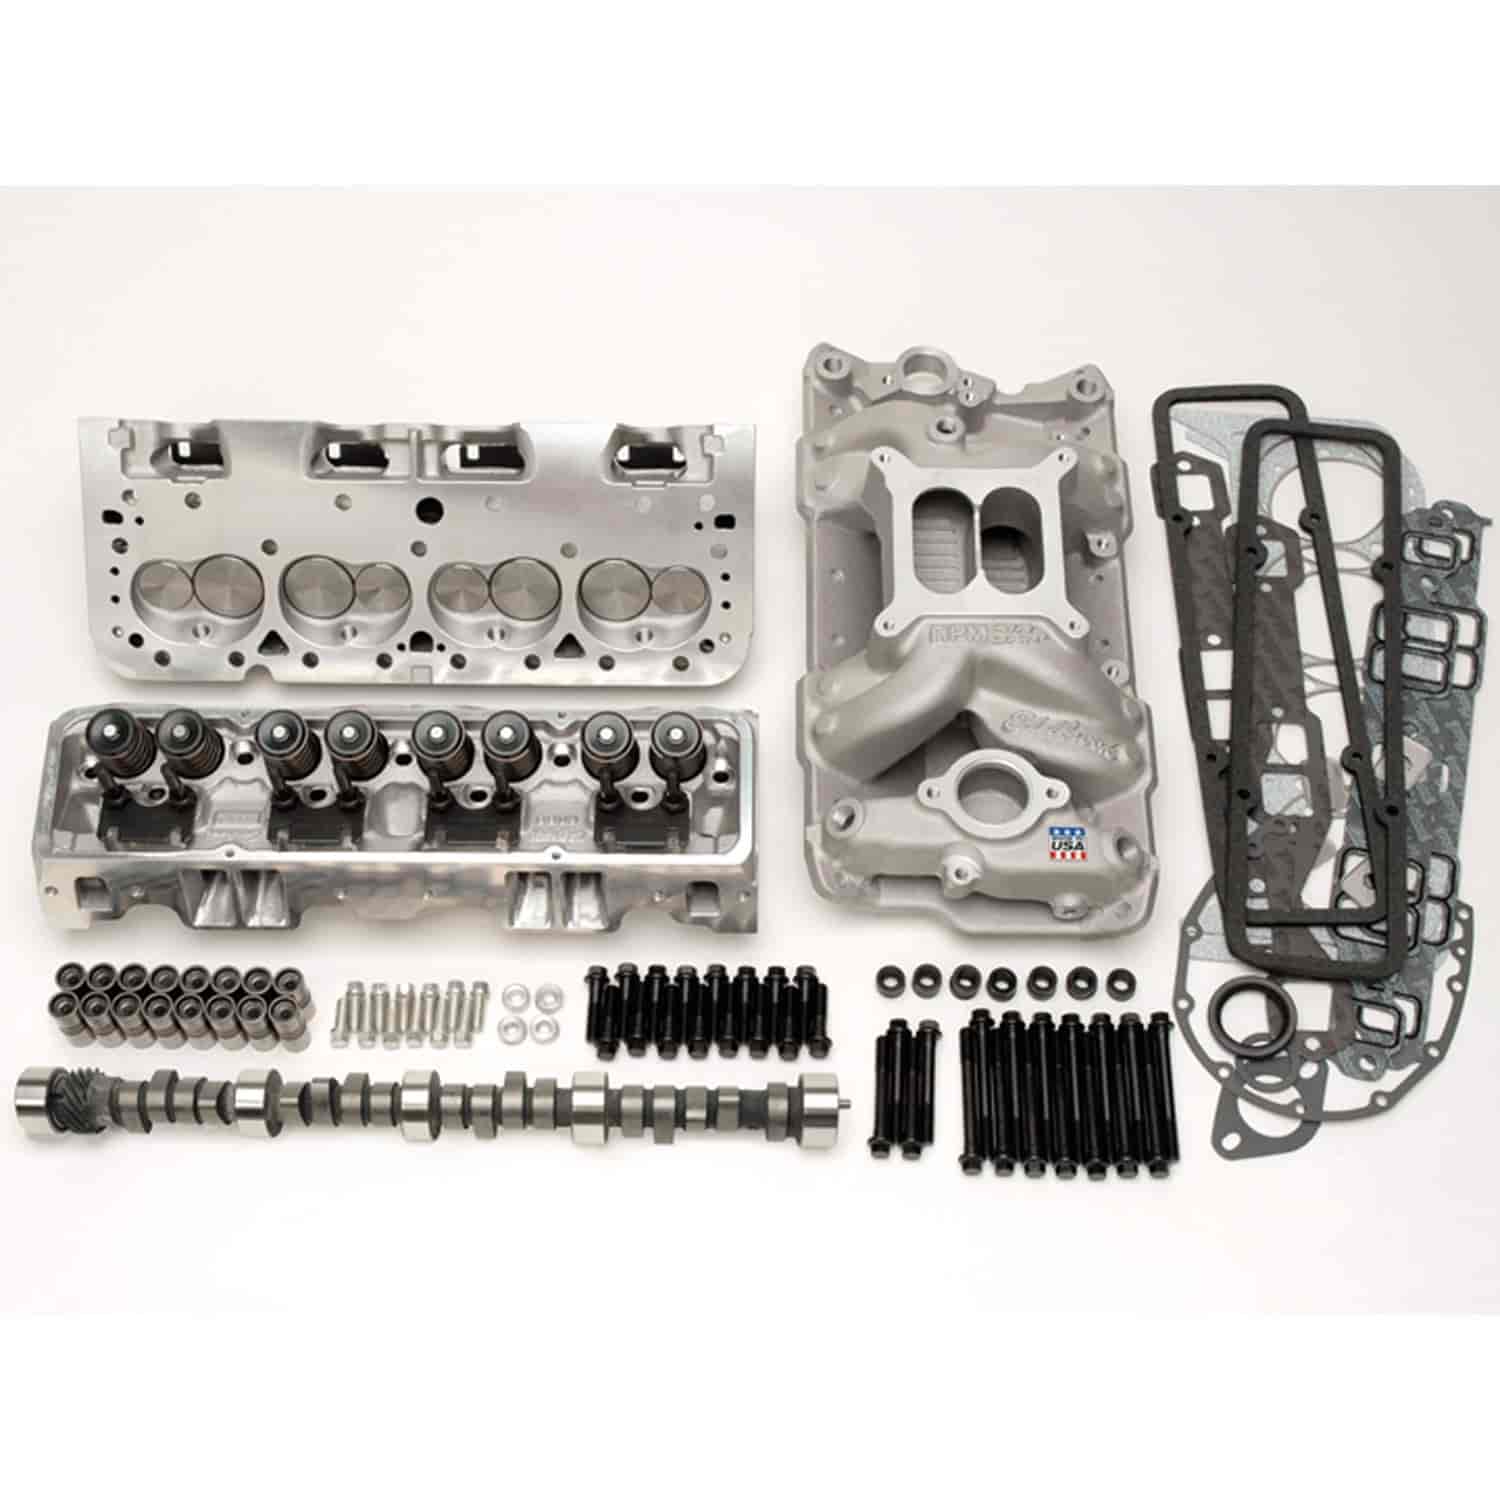 RPM Power Package Top End Kit for Pontiac 389-467